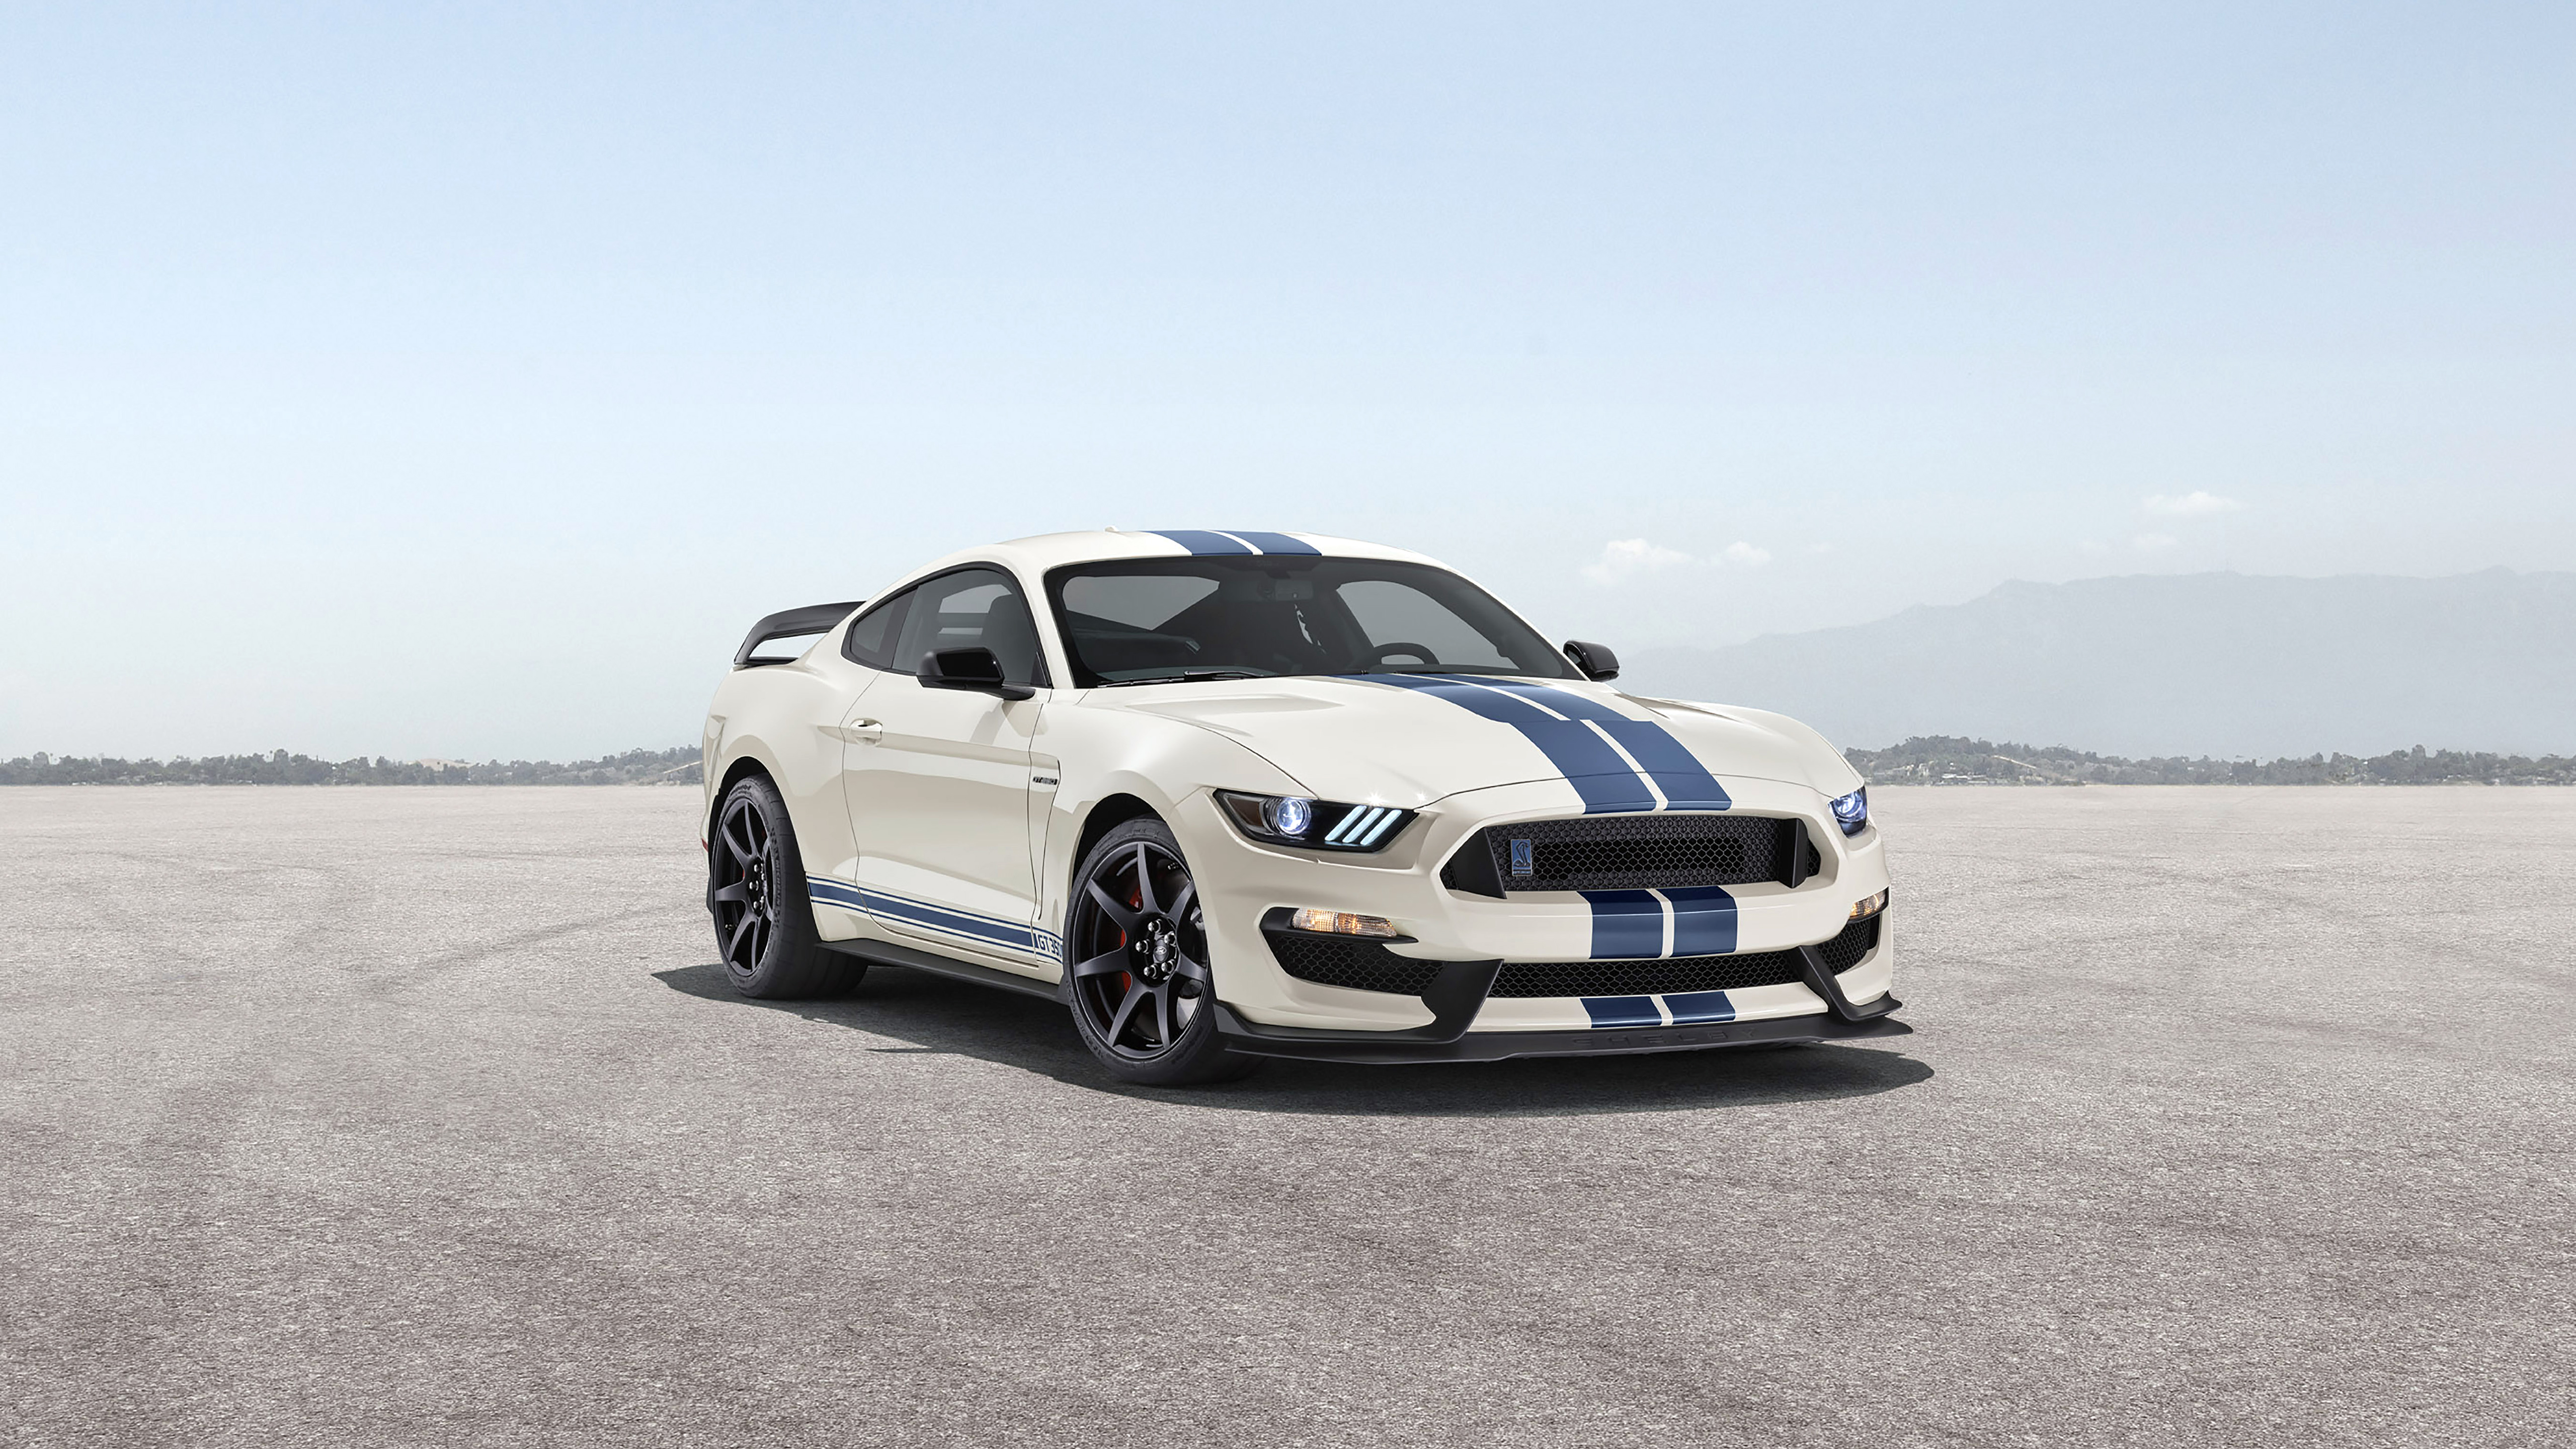 2020 Shelby Gt350 Heritage Edition 4k 5k 2 Wallpaper Hd Car Wallpapers Id 14006